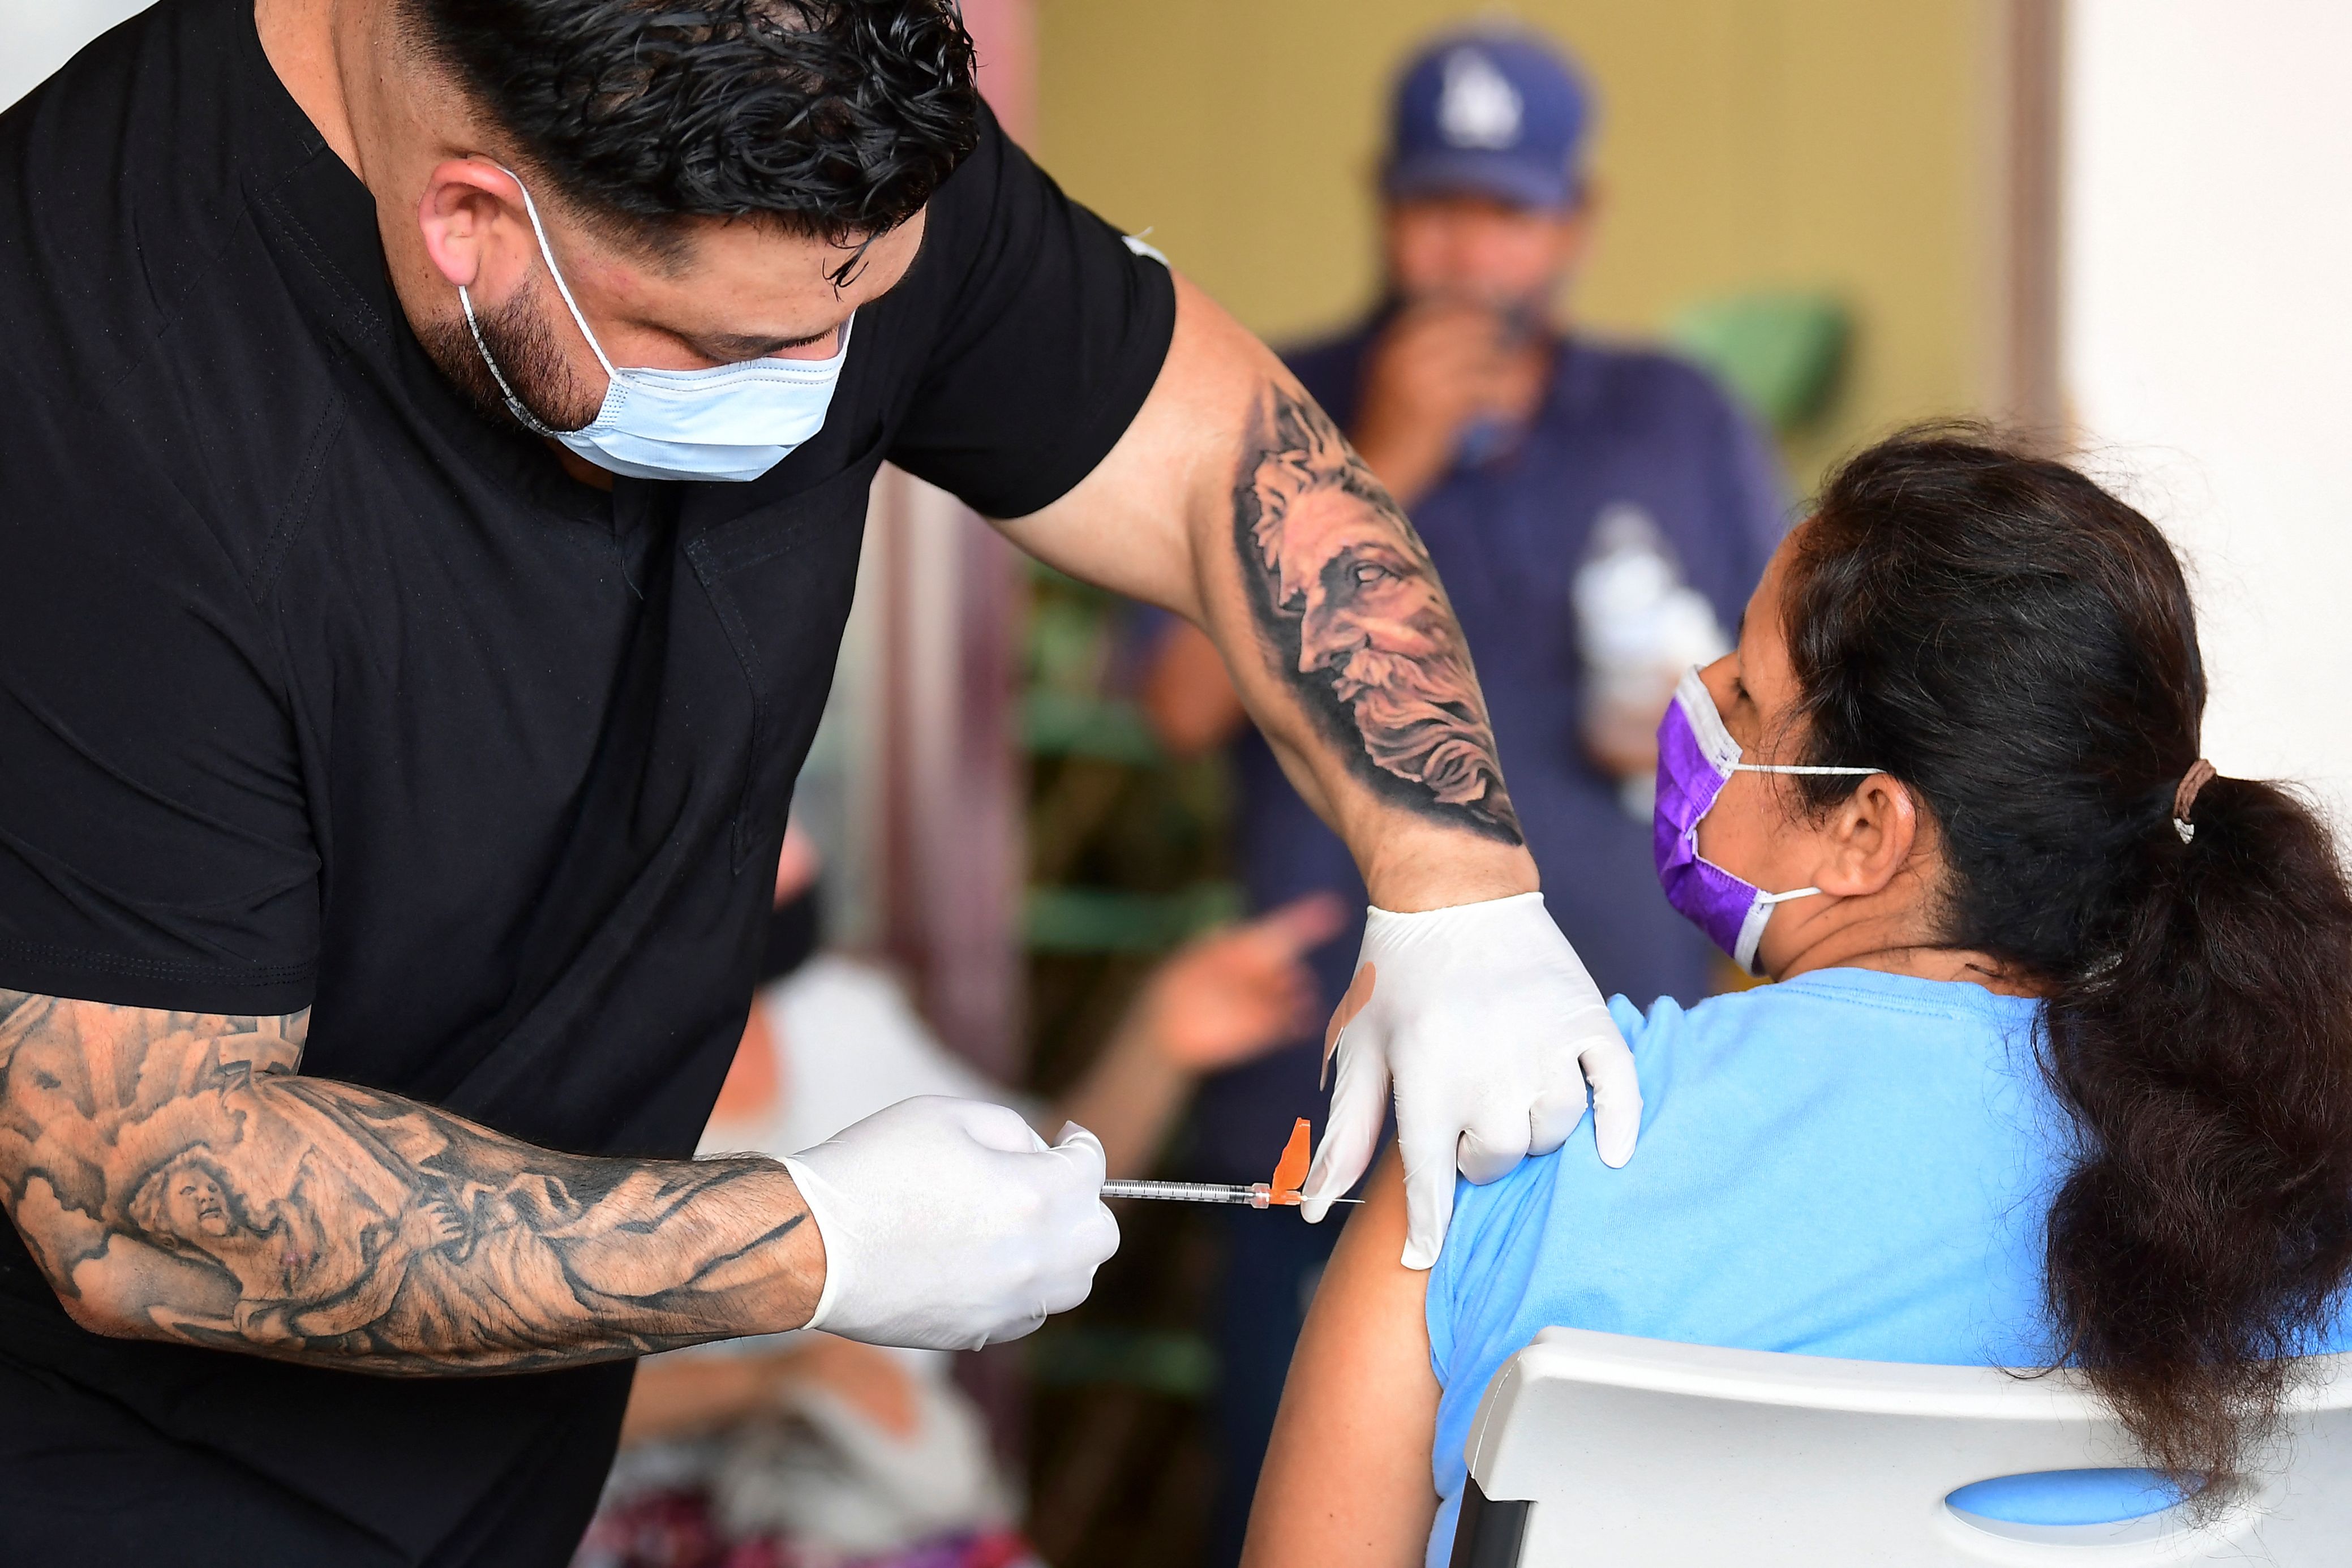 The Pfizer COVID-19 vaccine is administered at a mobile clinic to residents in an East Los Angeles neighborhood. (FREDERIC J. BROWN/AFP via Getty Images)